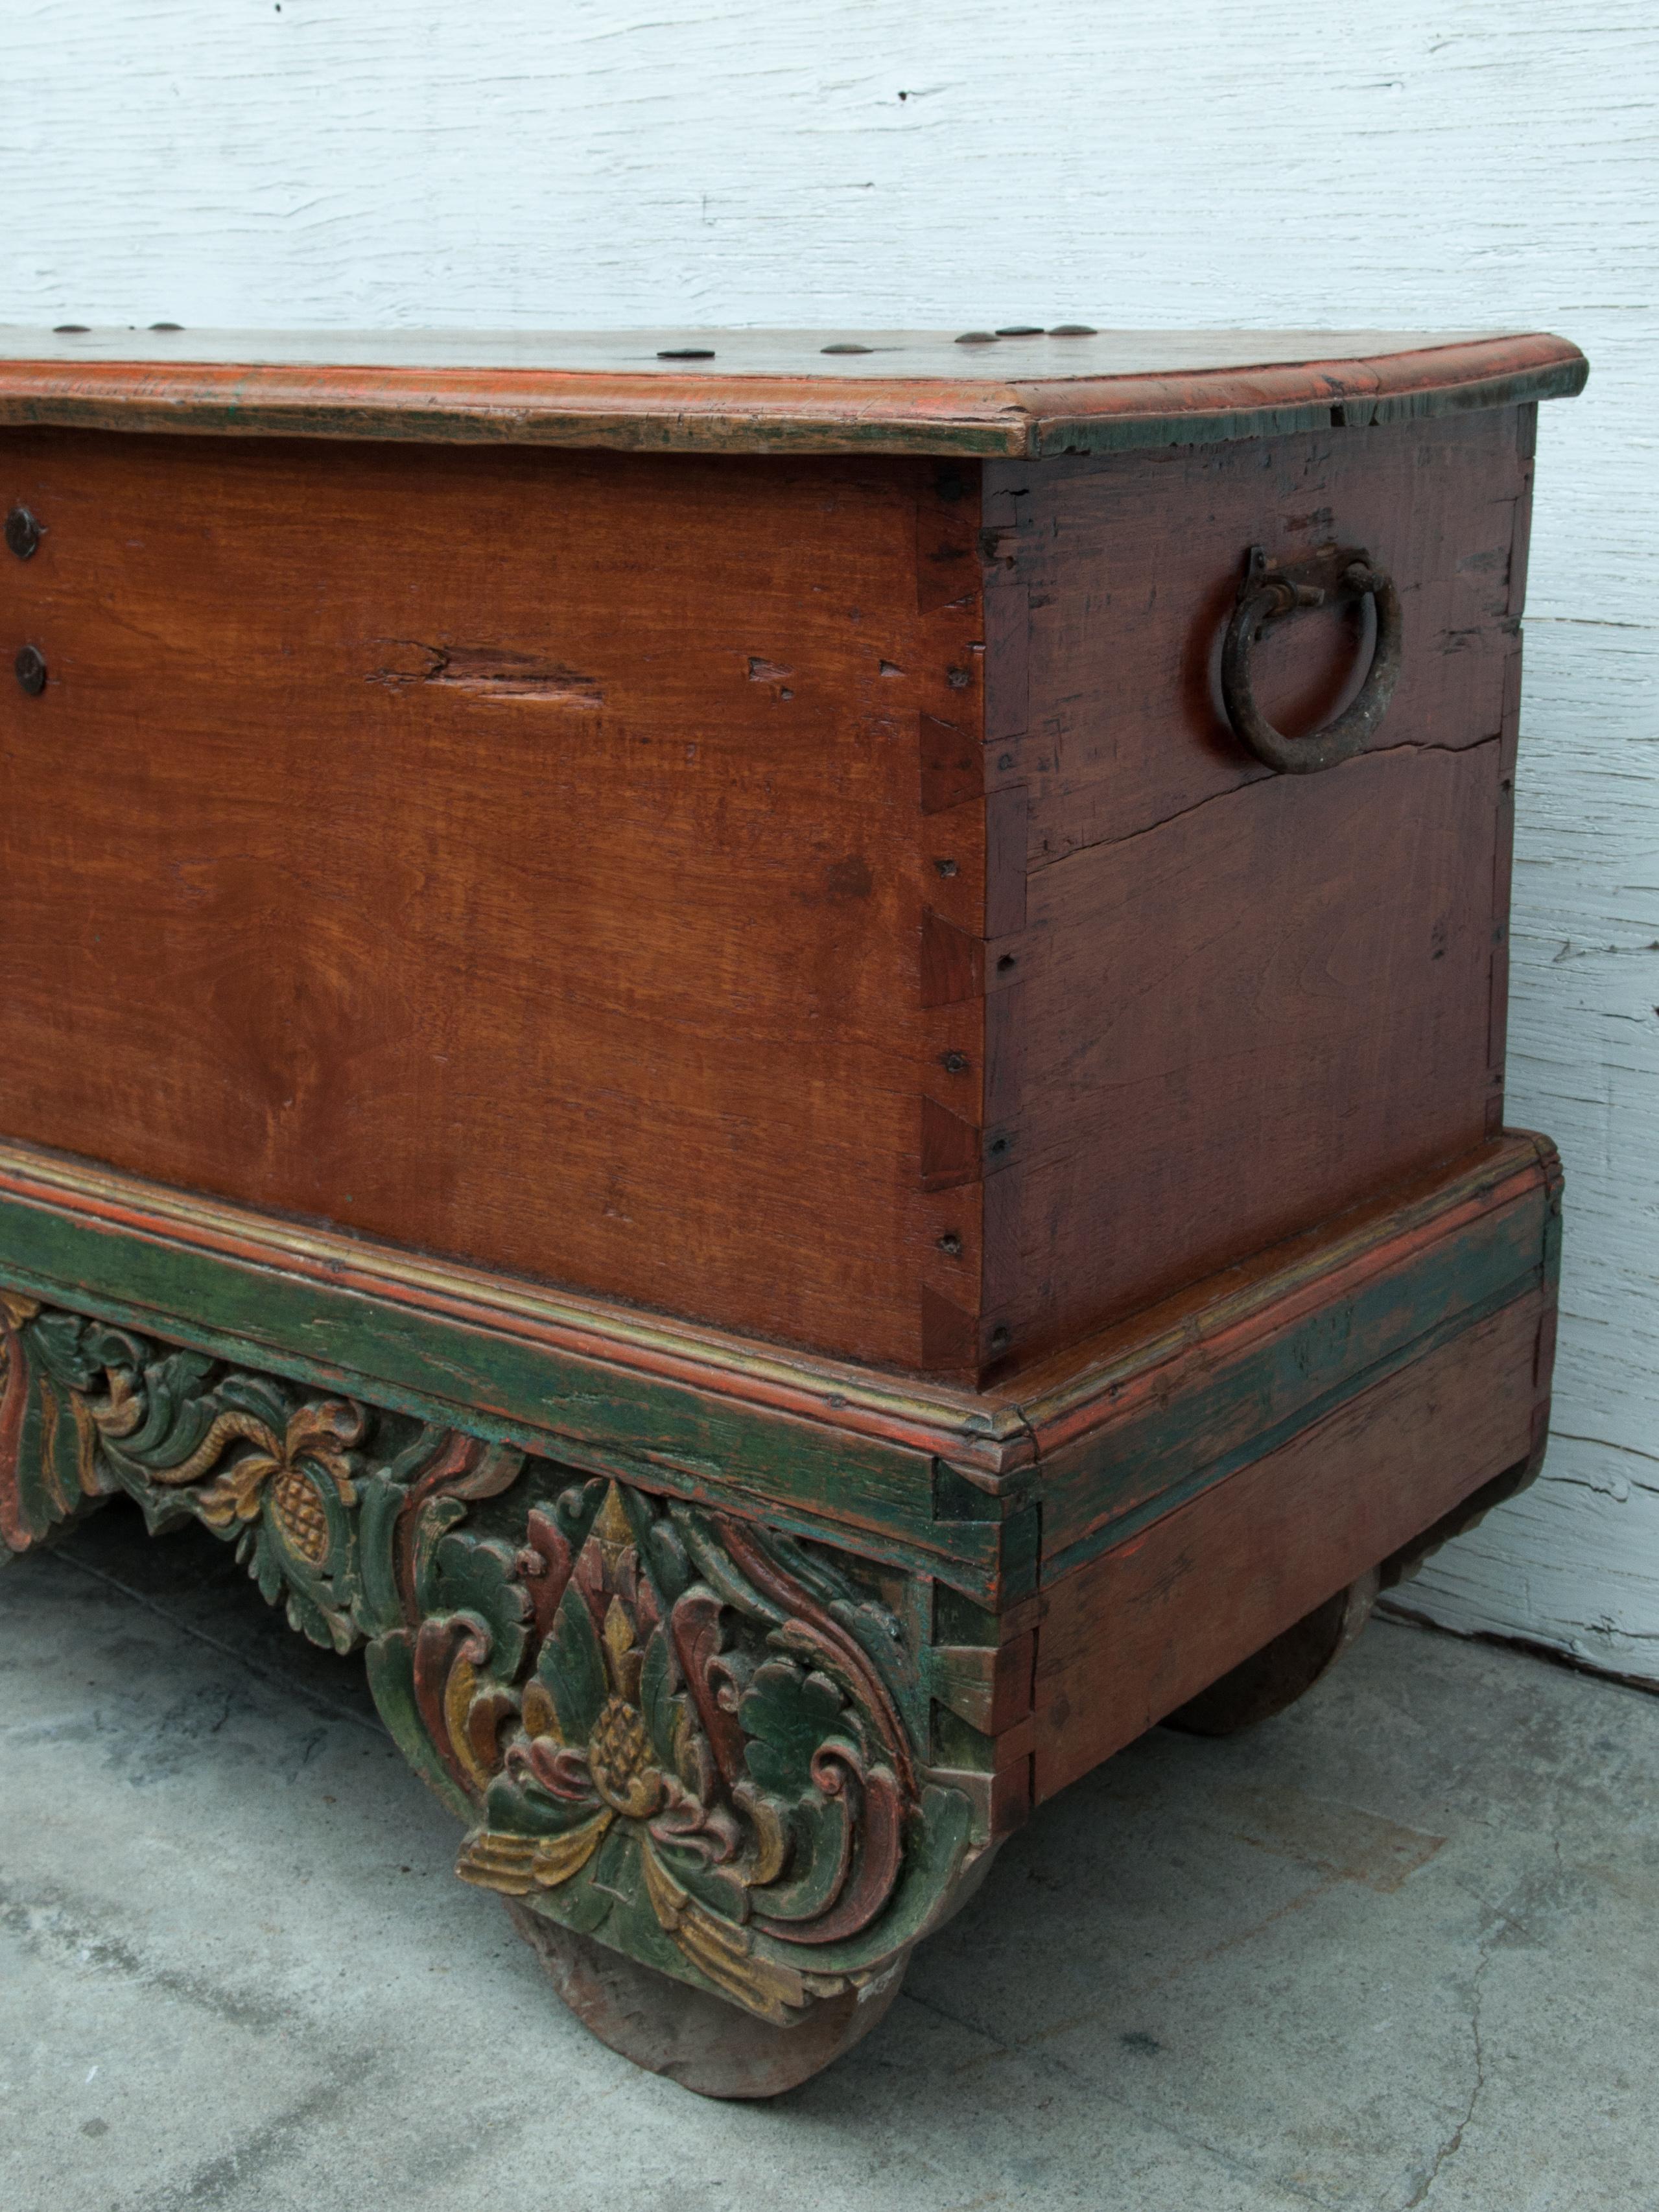 Hand-Crafted Mid-20th Century Teak Chest on Wheels from Java. Original Color and Hardware.